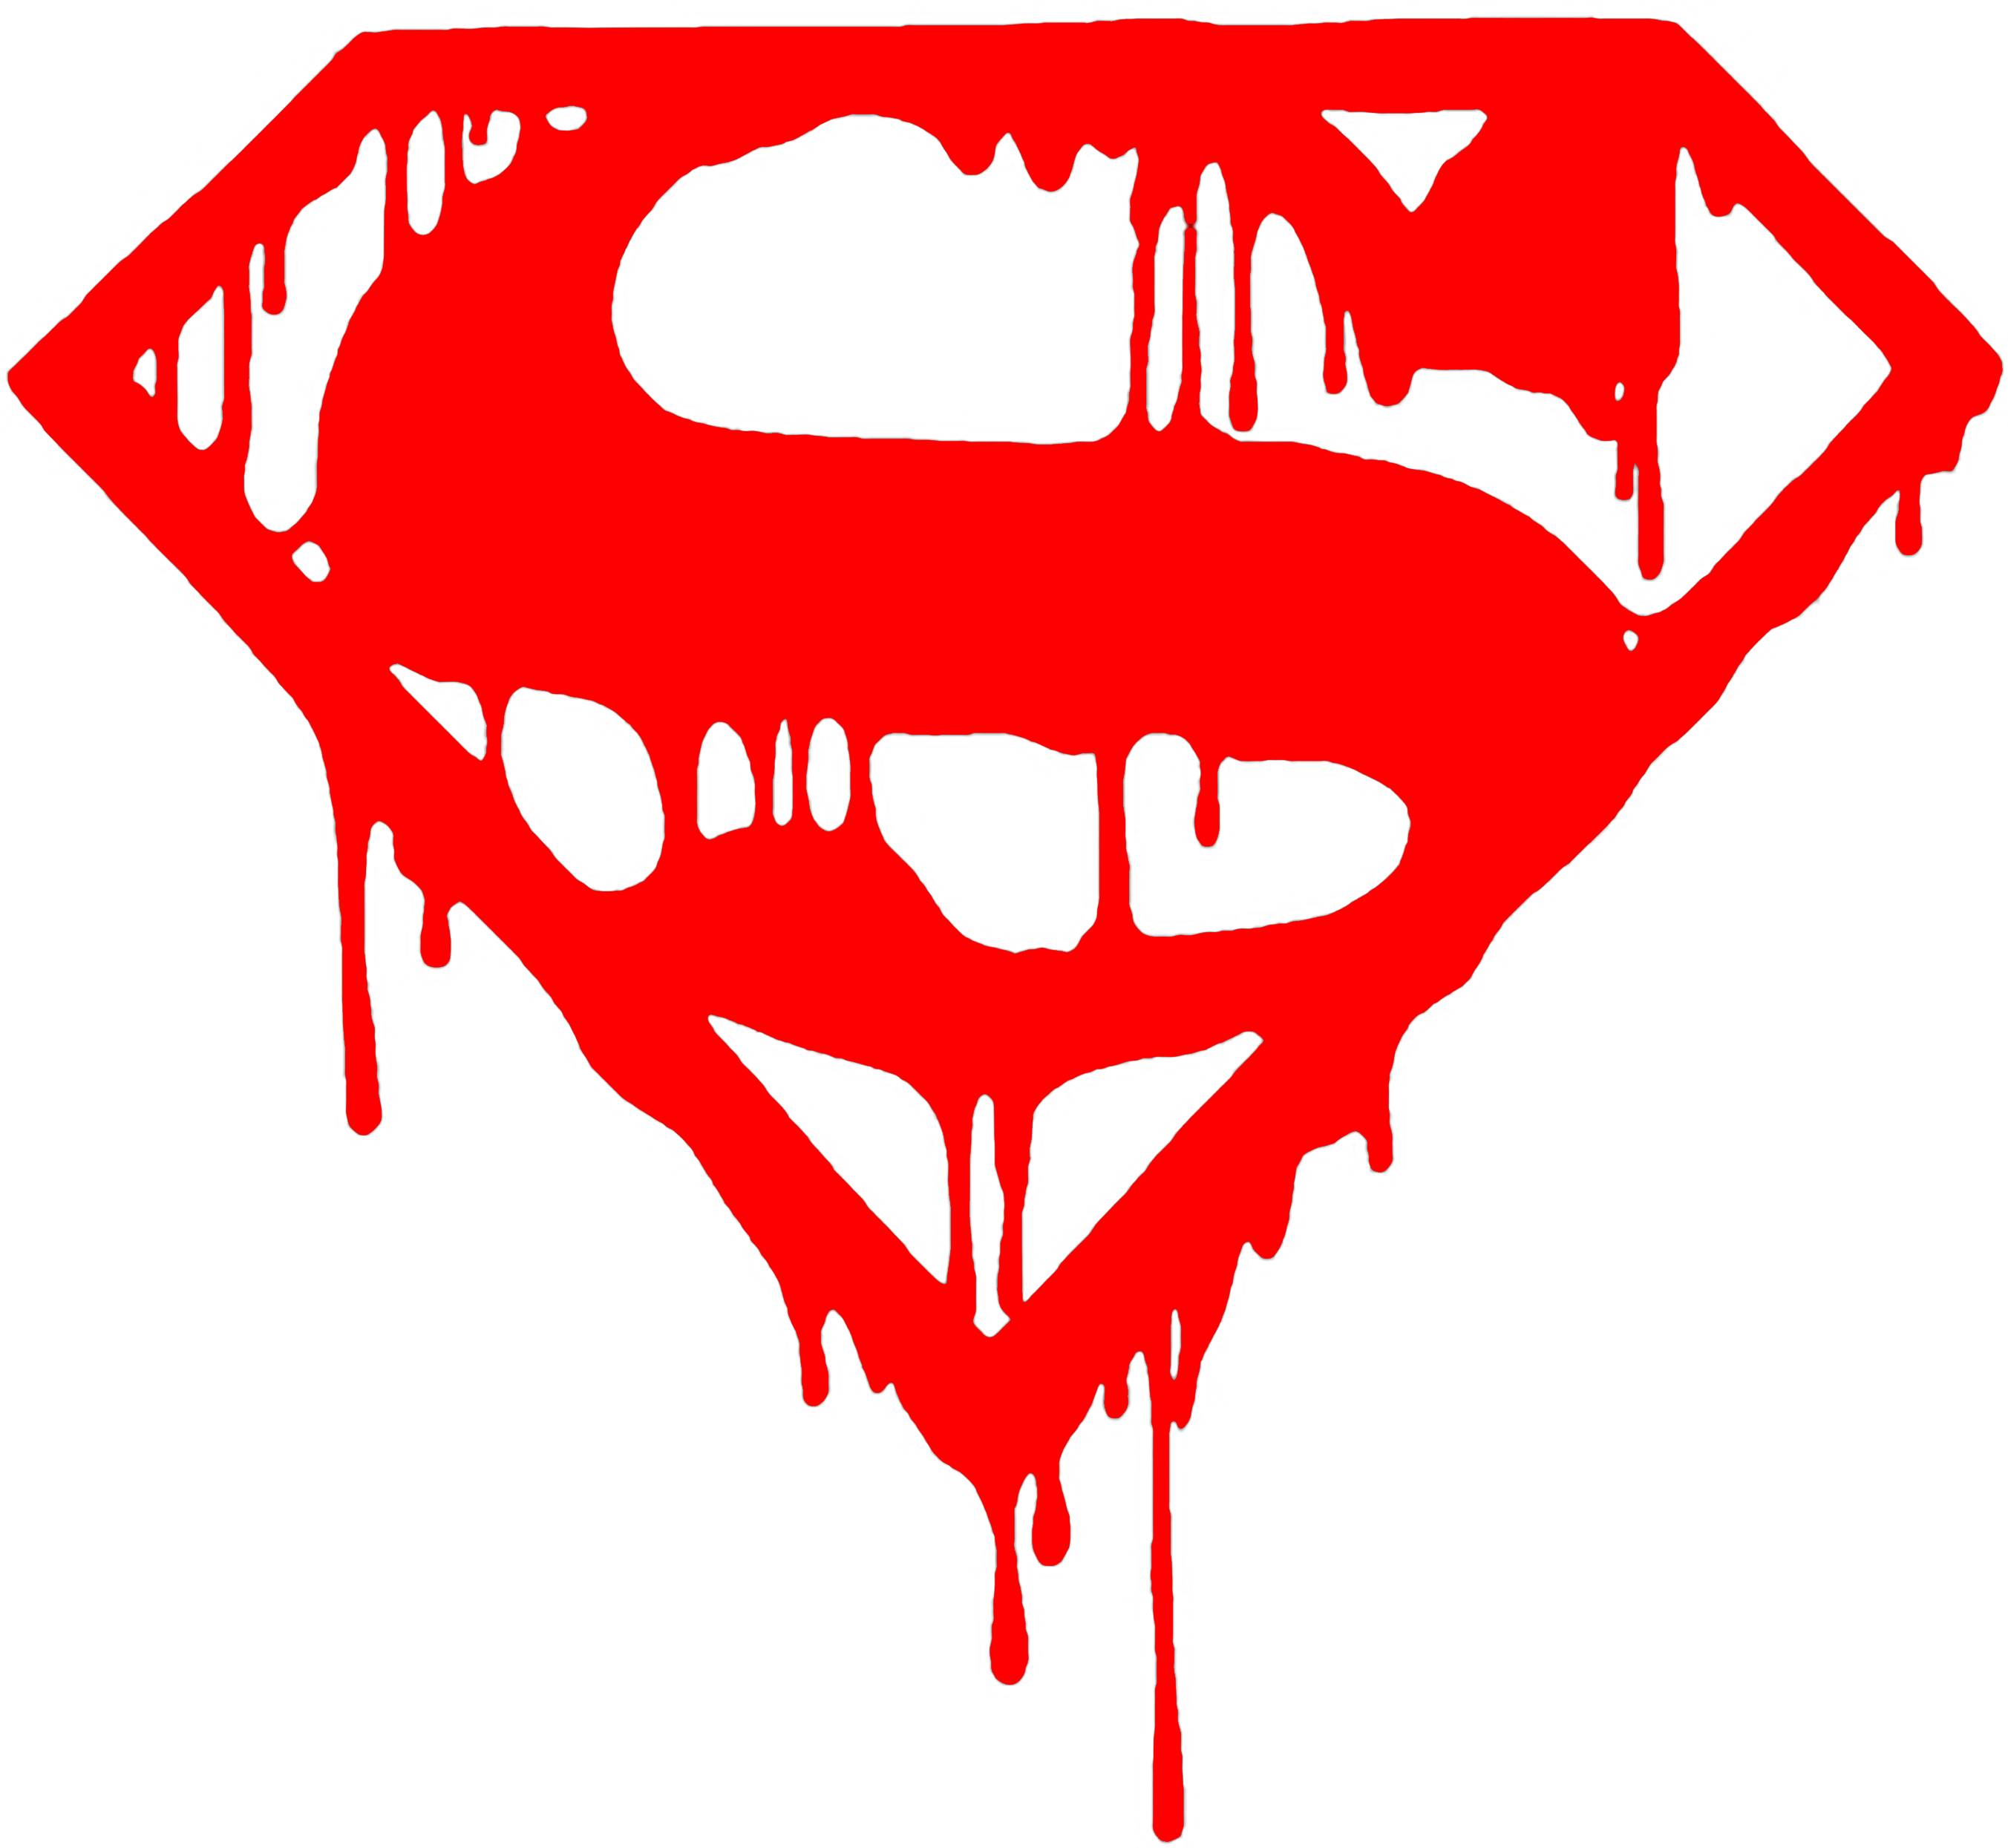 superman logo with number 6